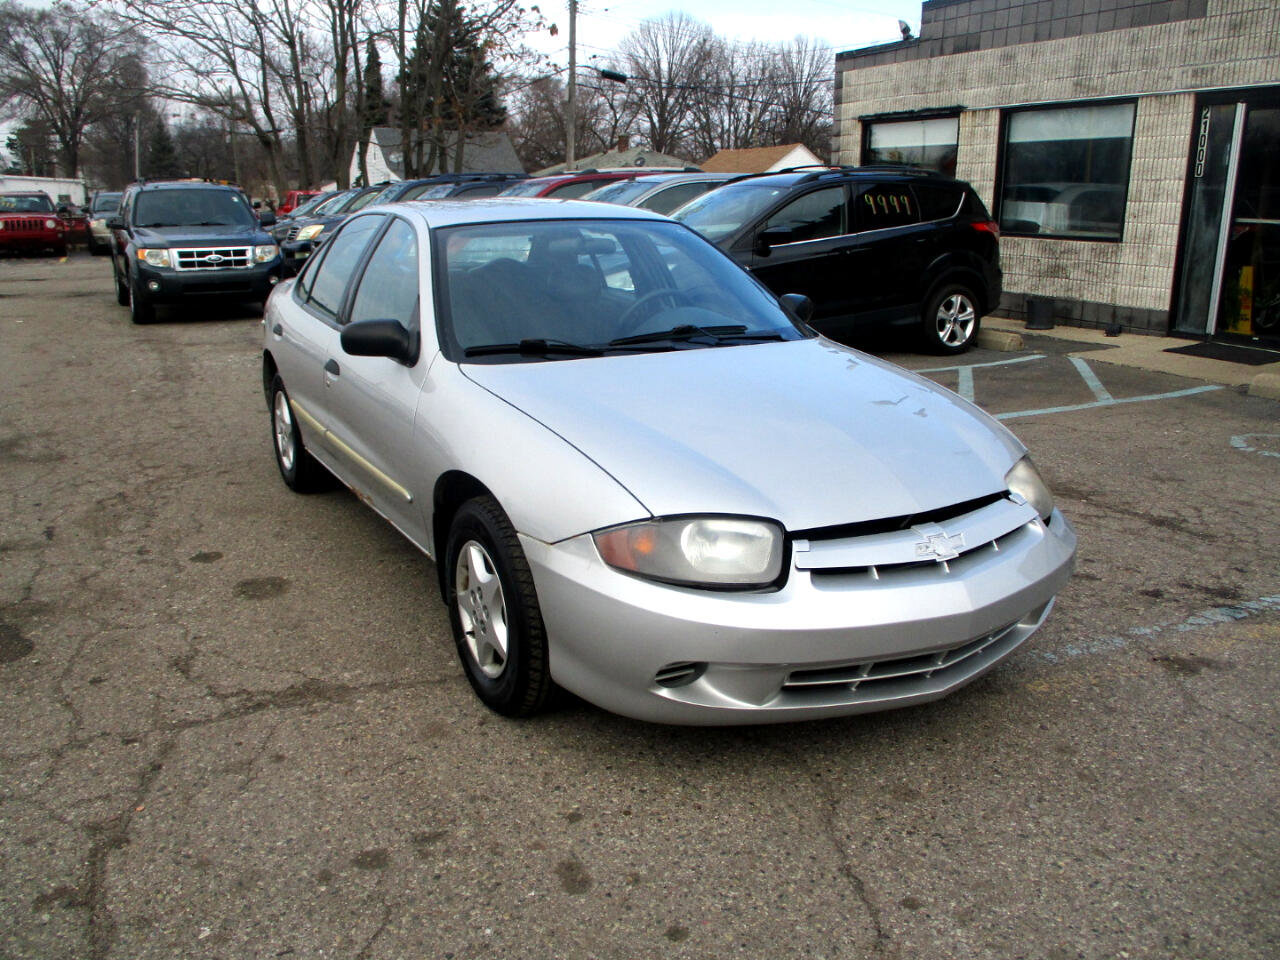 Used Chevrolet Cavalier for Sale Right Now - Autotrader